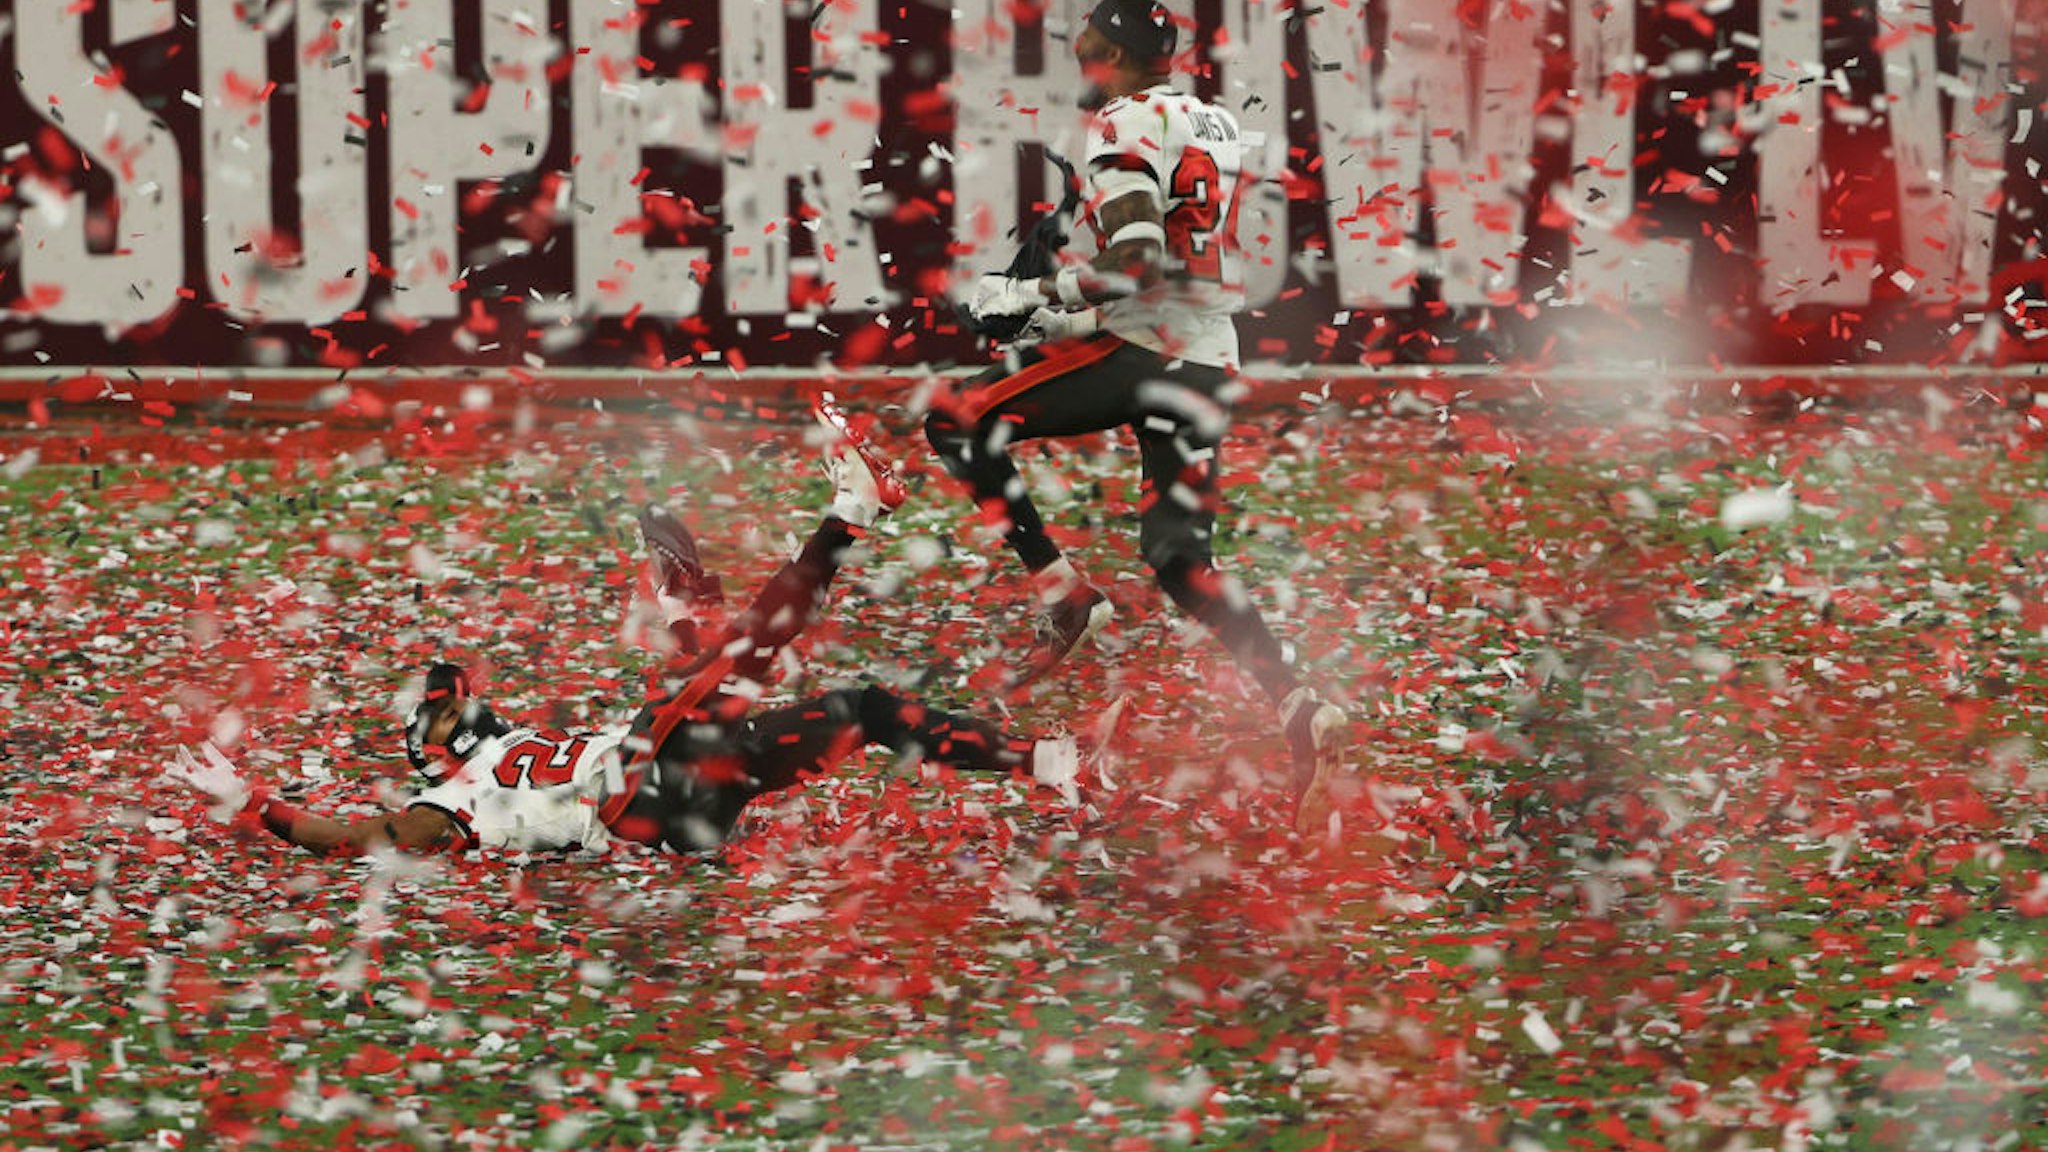 Andrew Adams #26 and Carlton Davis #24 of the Tampa Bay Buccaneers celebrate as confetti falls after defeating the Kansas City Chiefs in Super Bowl LV at Raymond James Stadium on February 07, 2021 in Tampa, Florida.